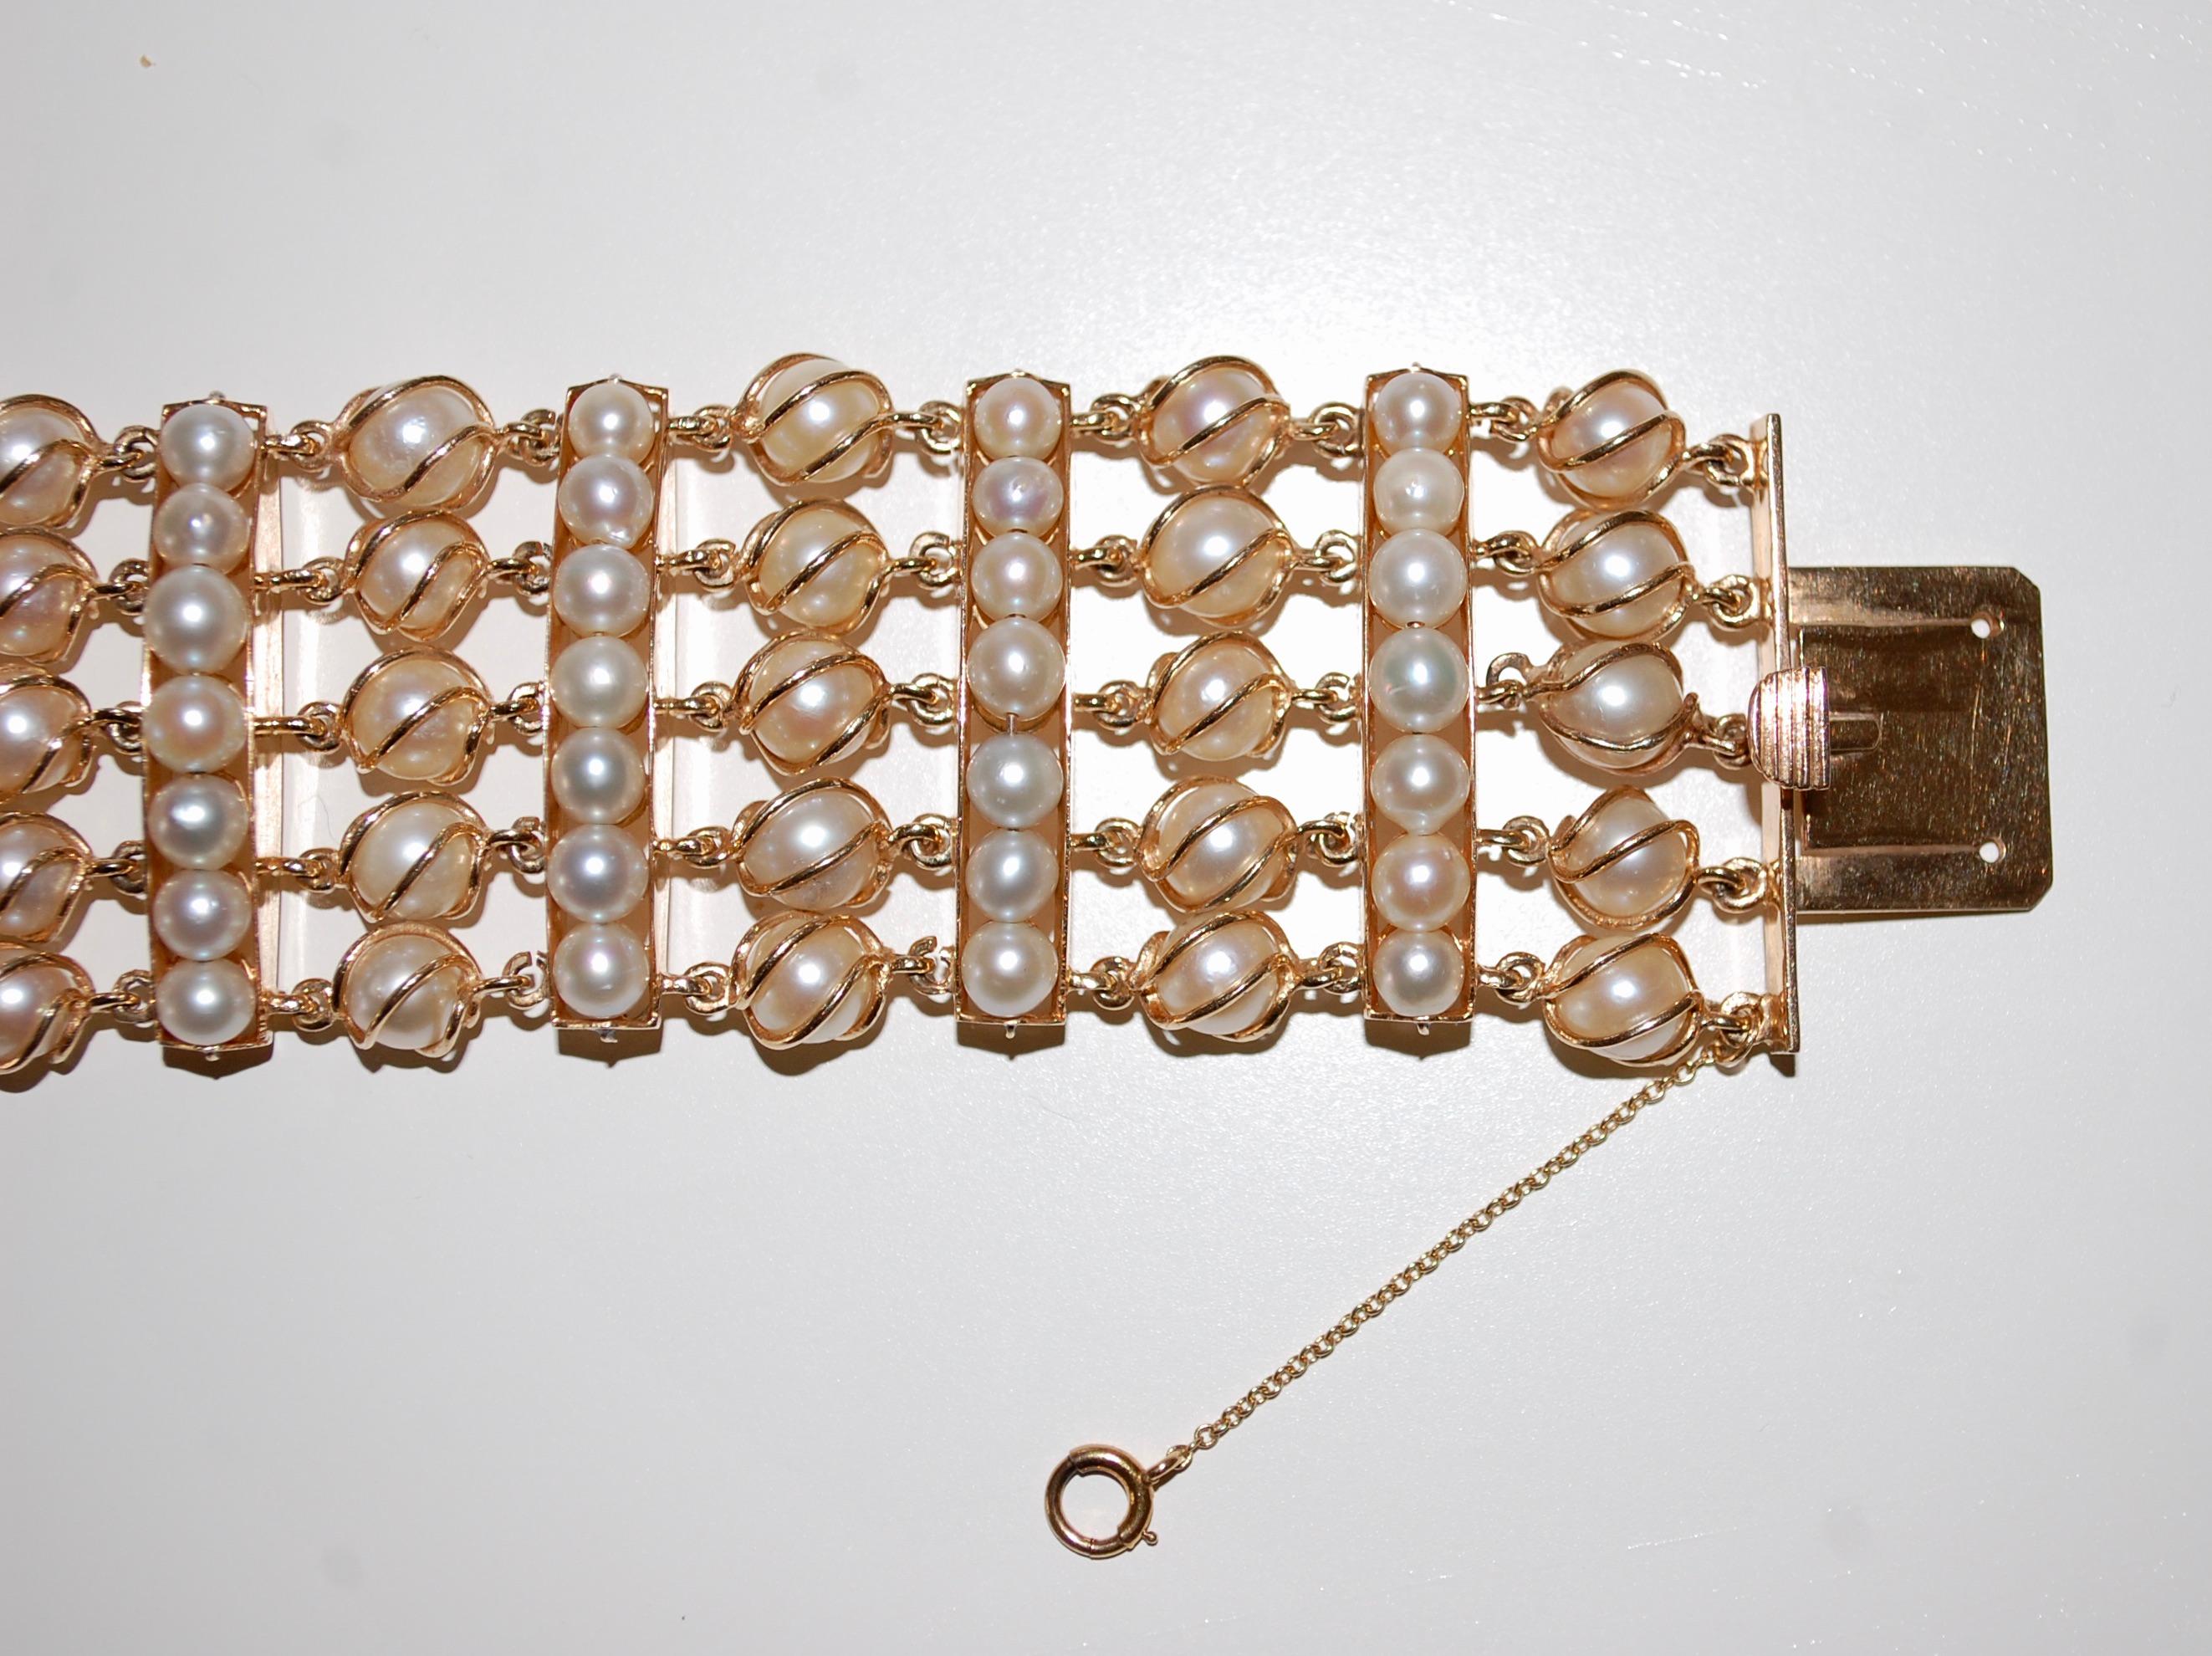  Pearl 14k Gold Multi Strand Bracelet  In Excellent Condition For Sale In Lake Worth, FL